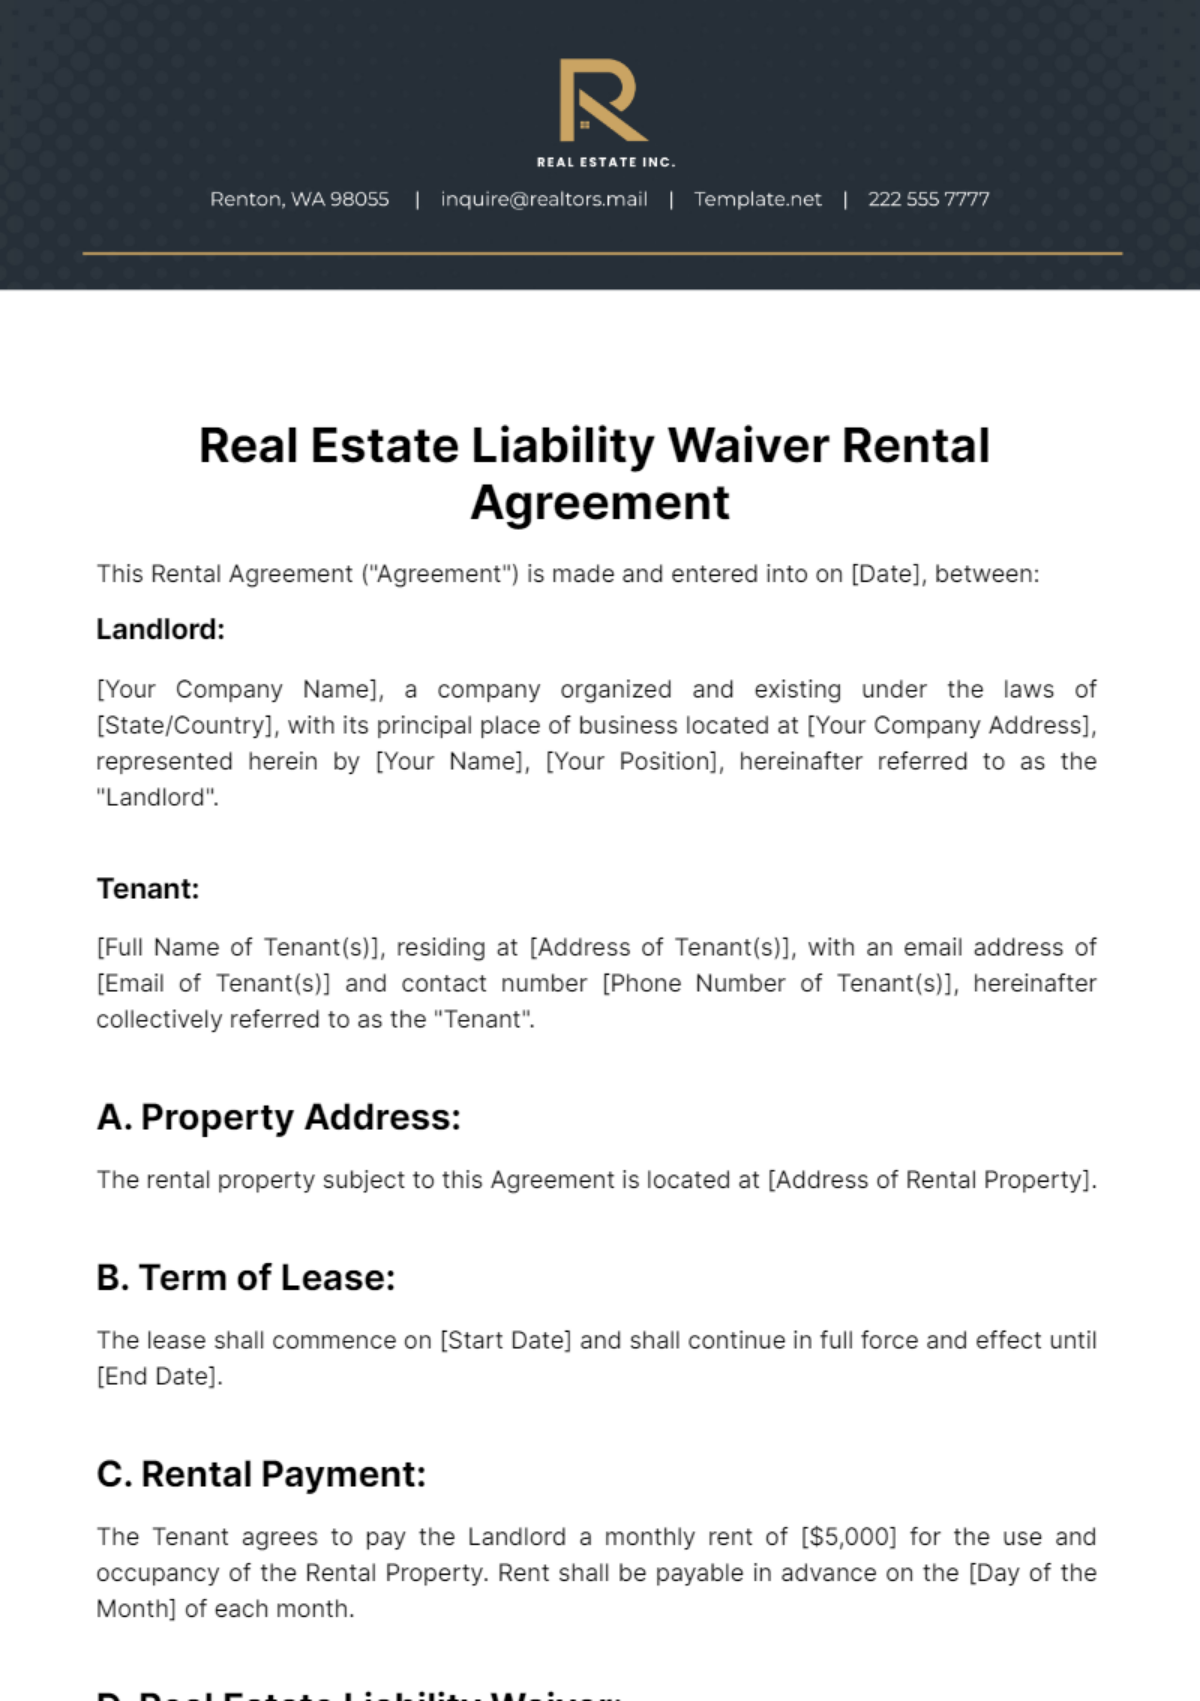 Real Estate Liability Waiver Rental Agreement Template